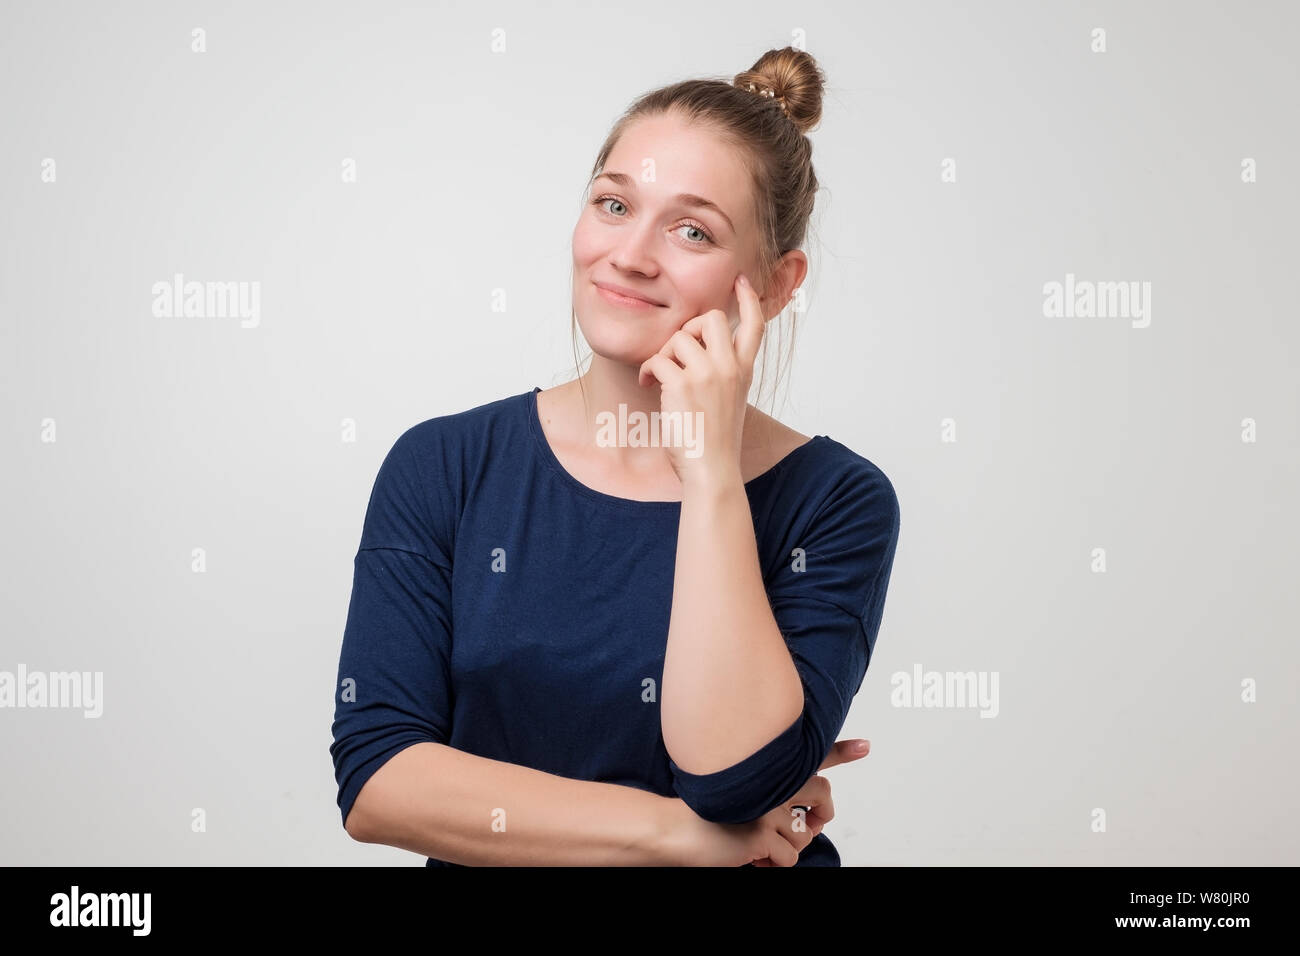 Happy young woman with hair in bun looking at camera avec joie et sourire charmeur. Banque D'Images